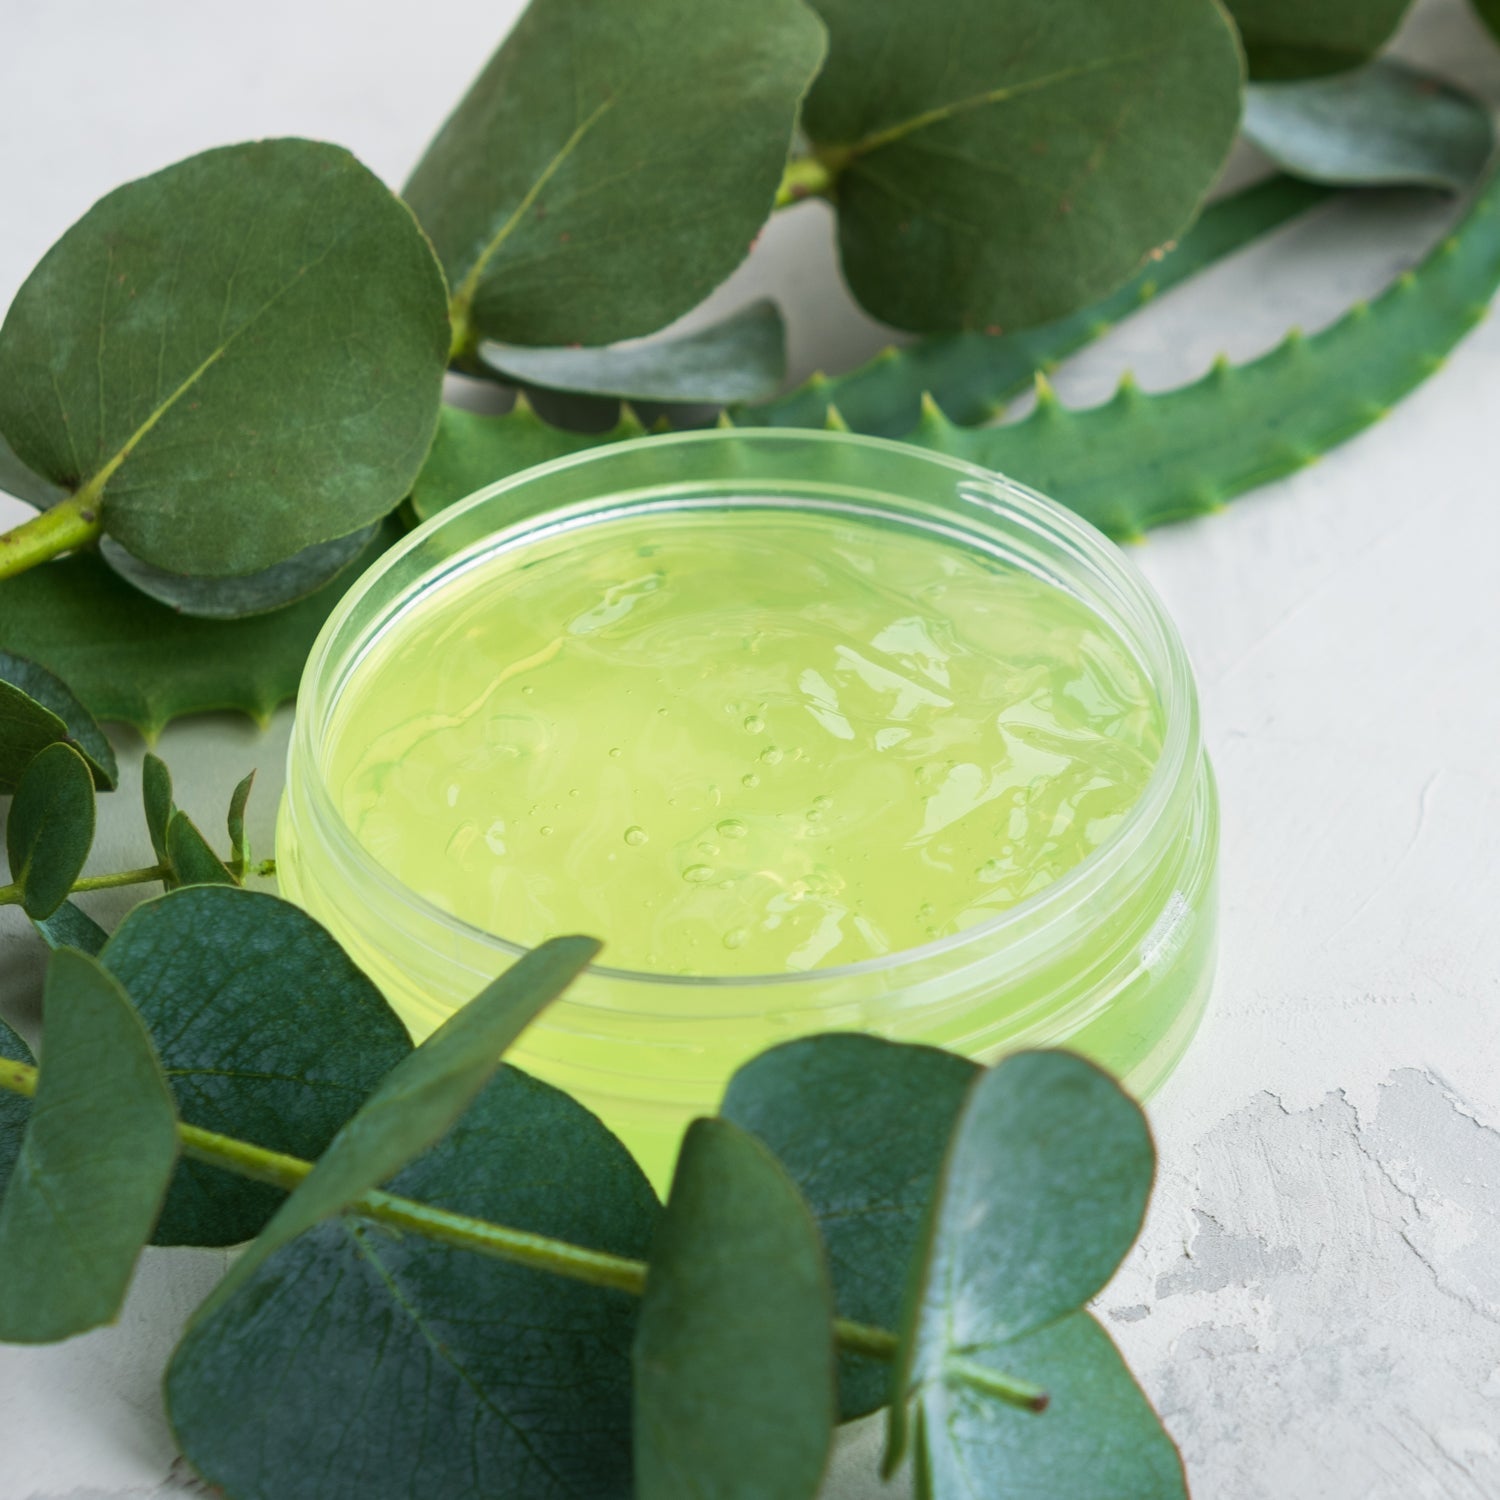 Aloe vera, an inspiration for Eucalyptus Aloe, an odor-controlling candle from Tuscany Candle's Serene Clean® collection of scented candles